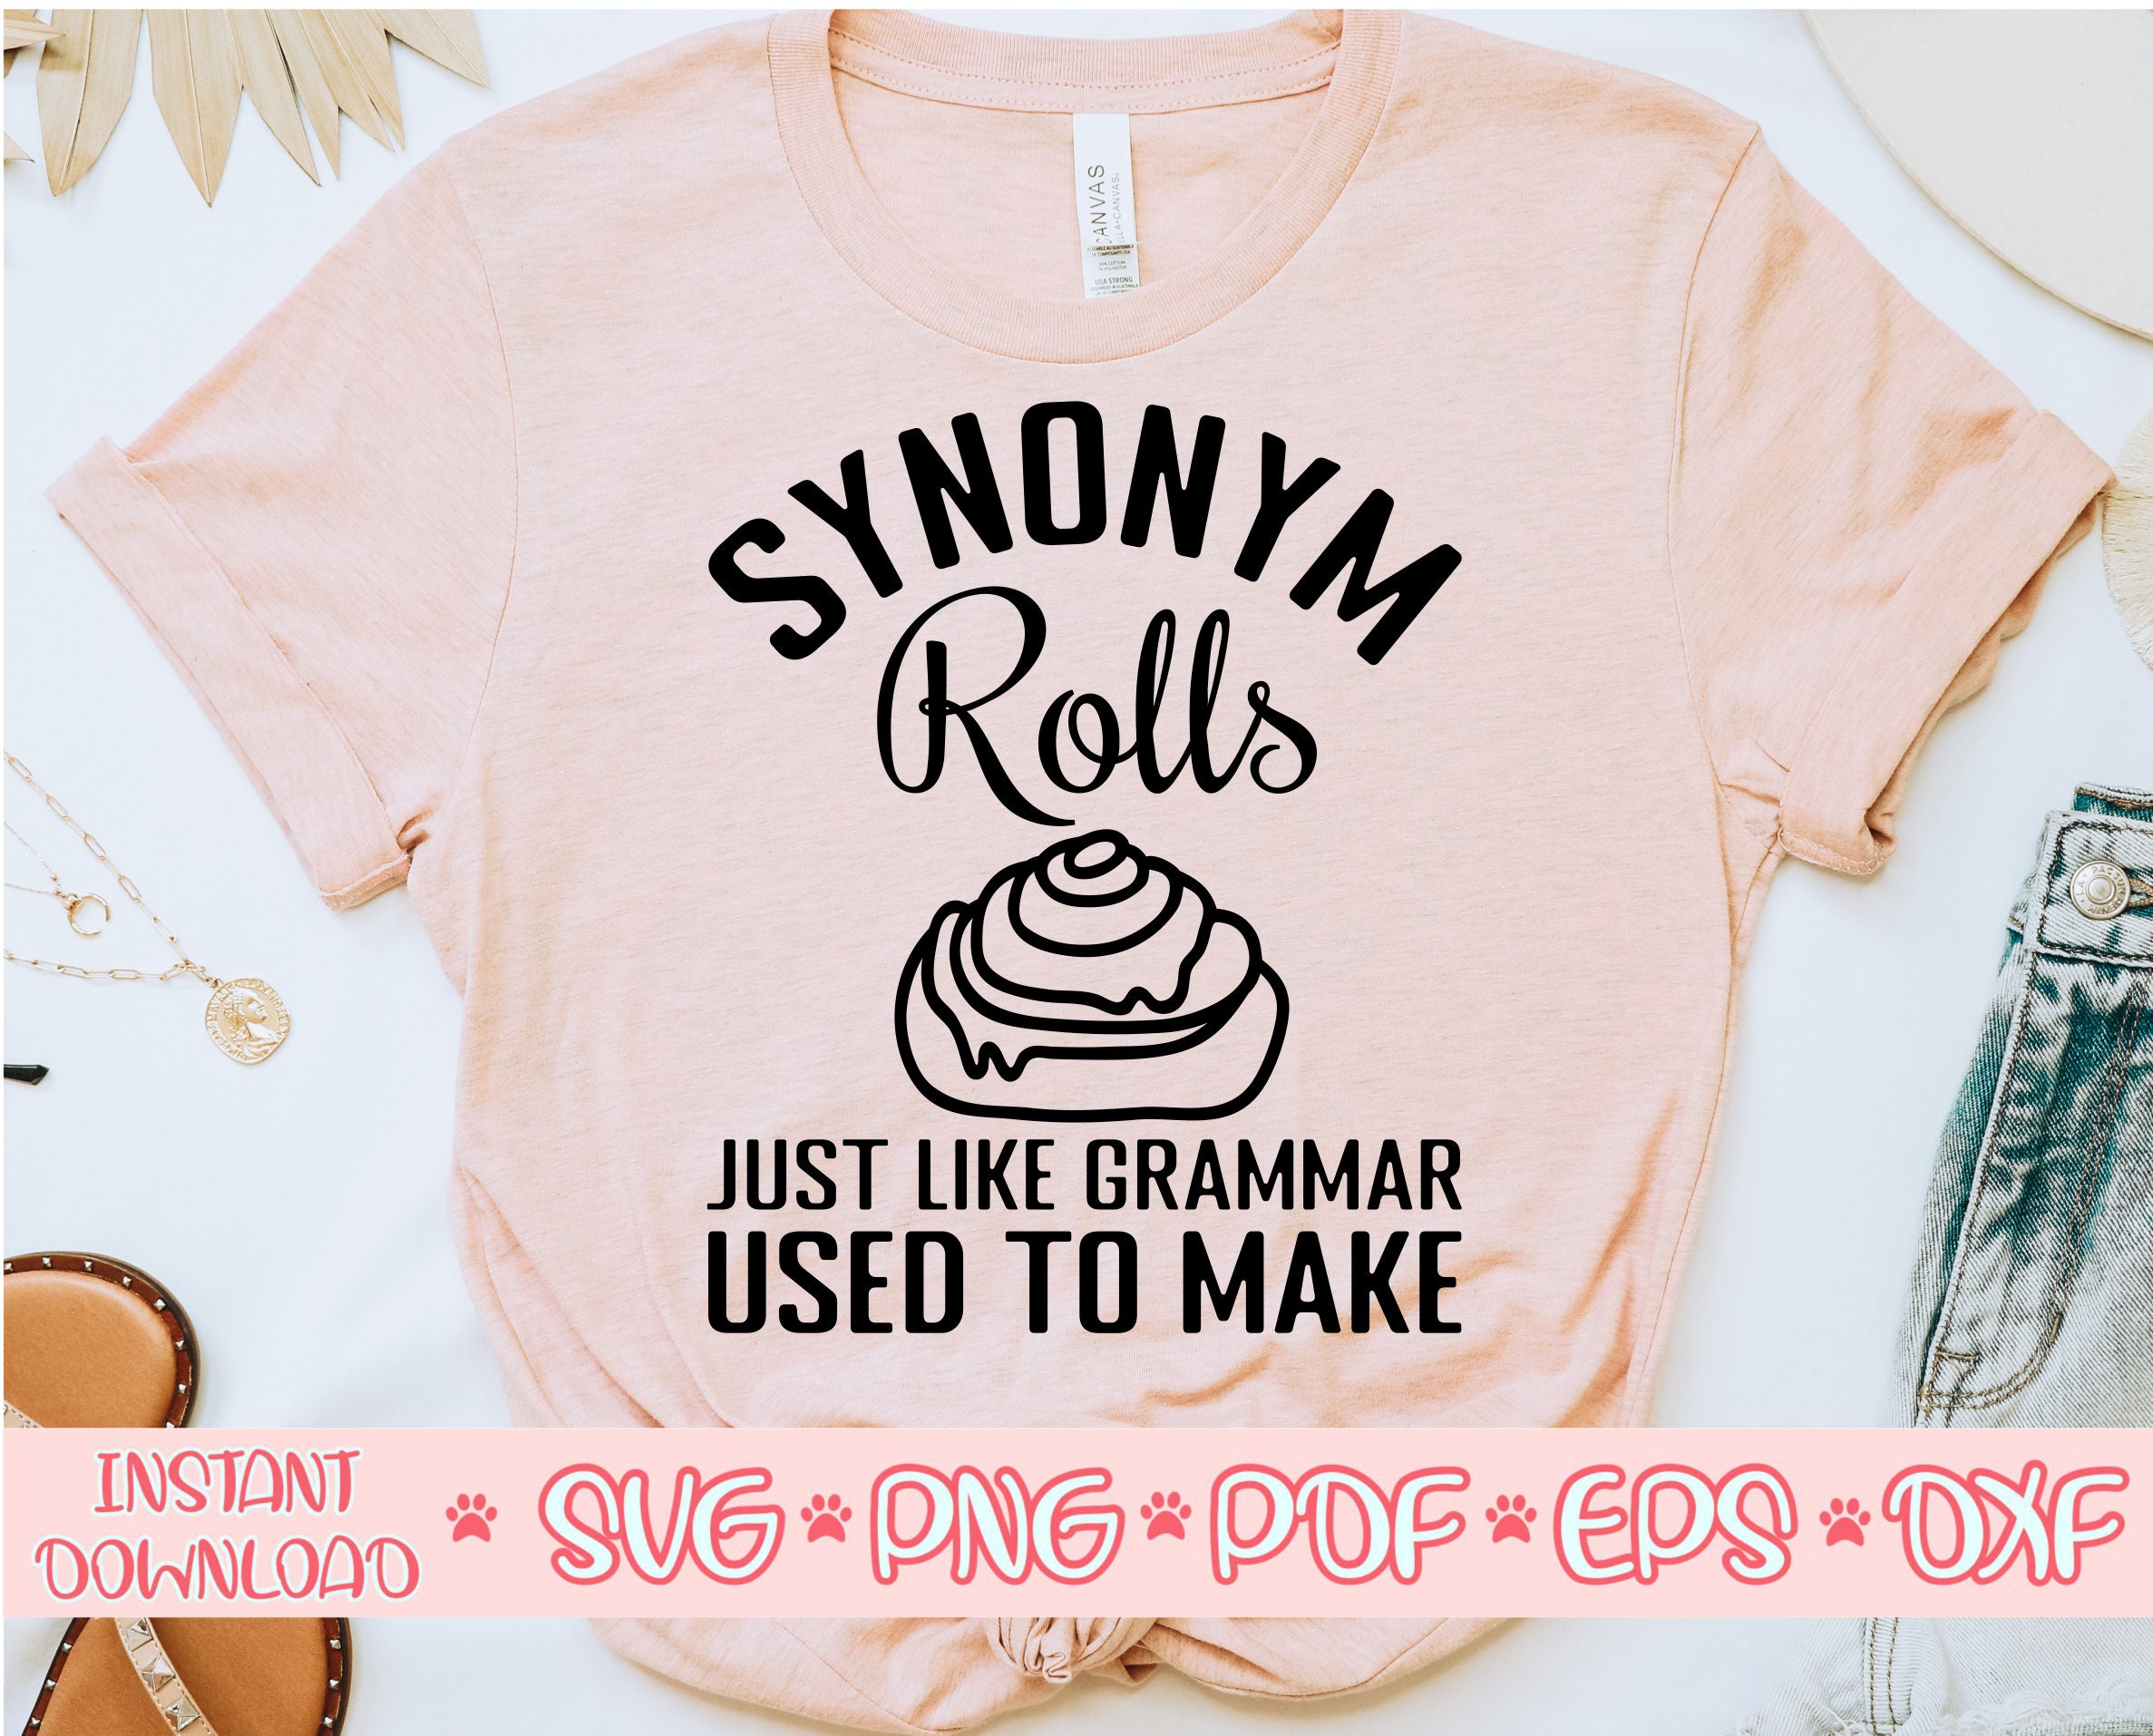 Funny Synonym Rolls Grammar T-shirt Humorous Foodie Food double